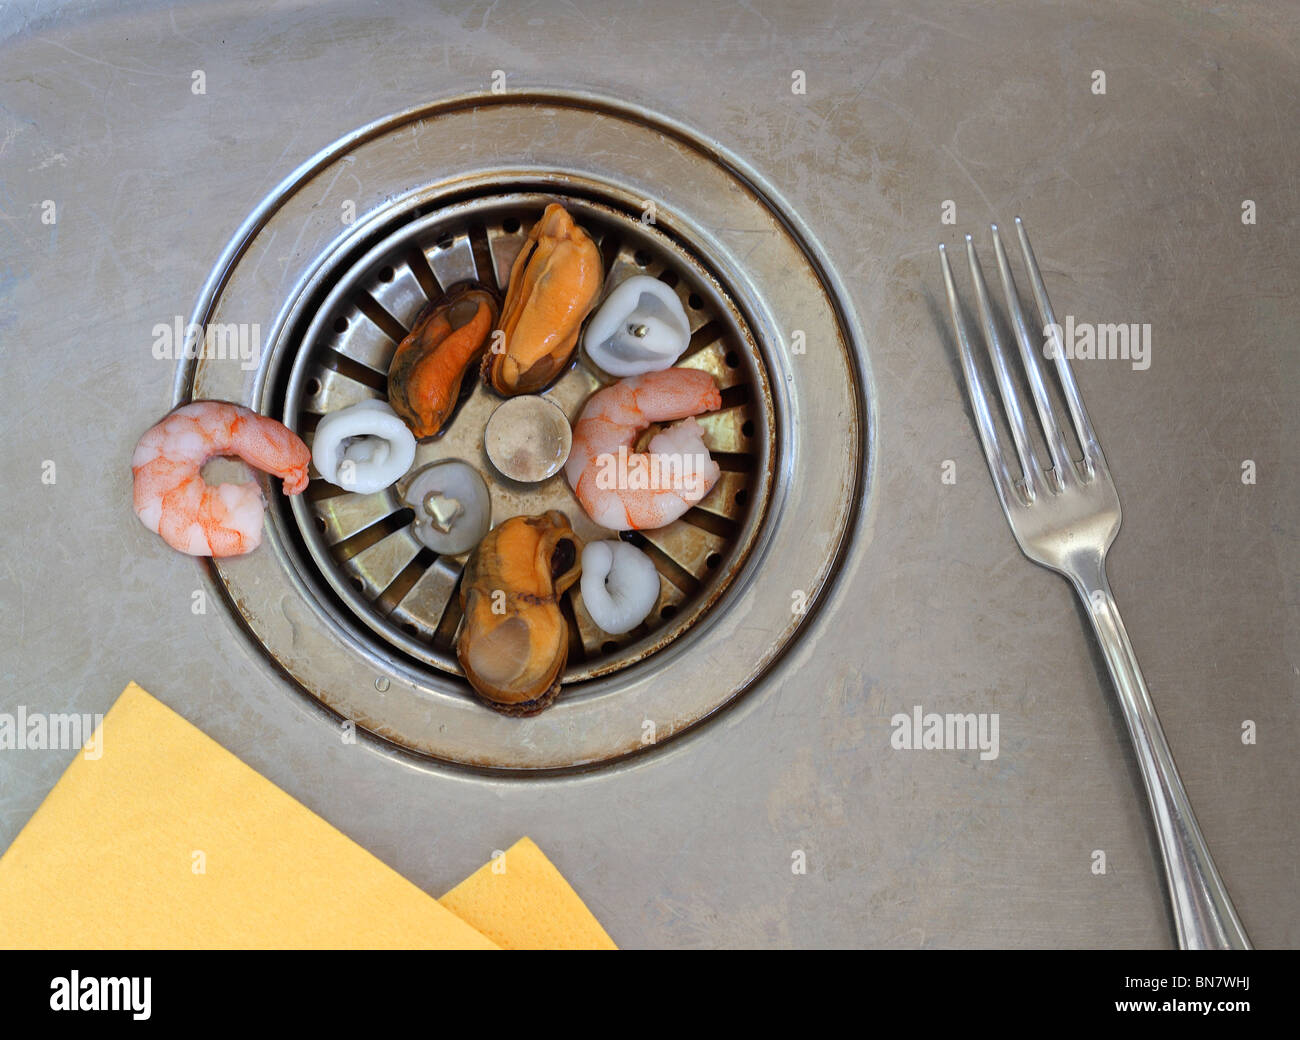 sink drain seafood leftovers Stock Photo